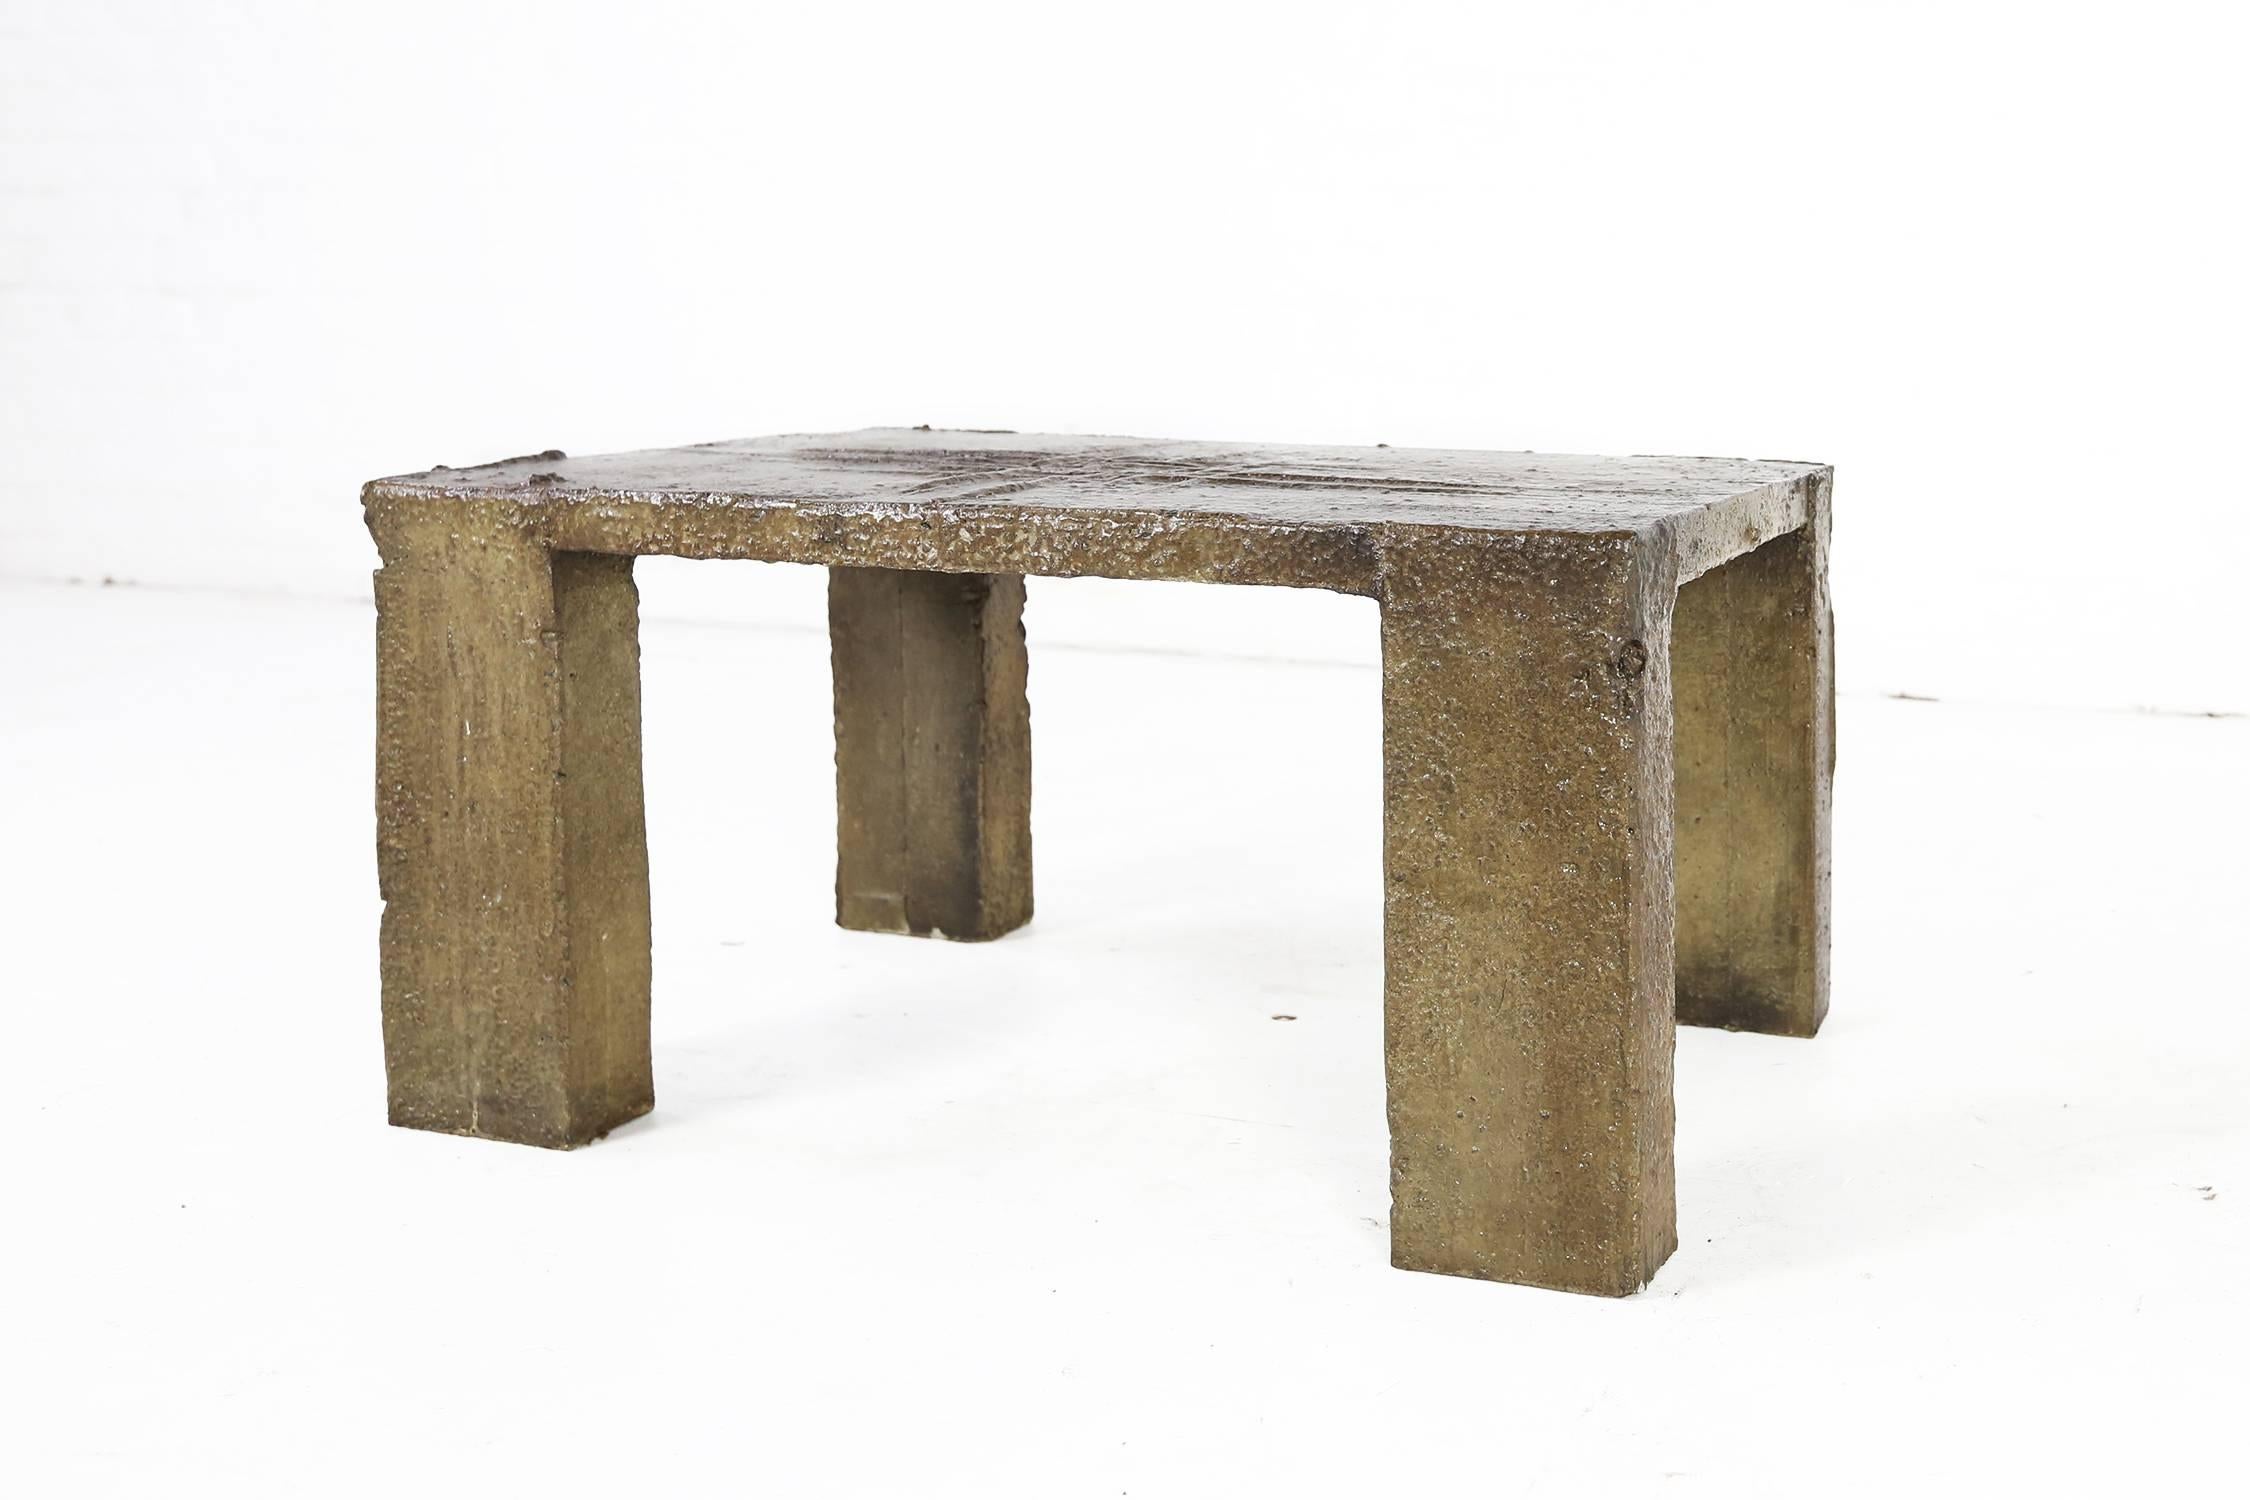 Concrete top with a concrete free slapped décor made in the 1970s by Belgian artist Pia Manu.